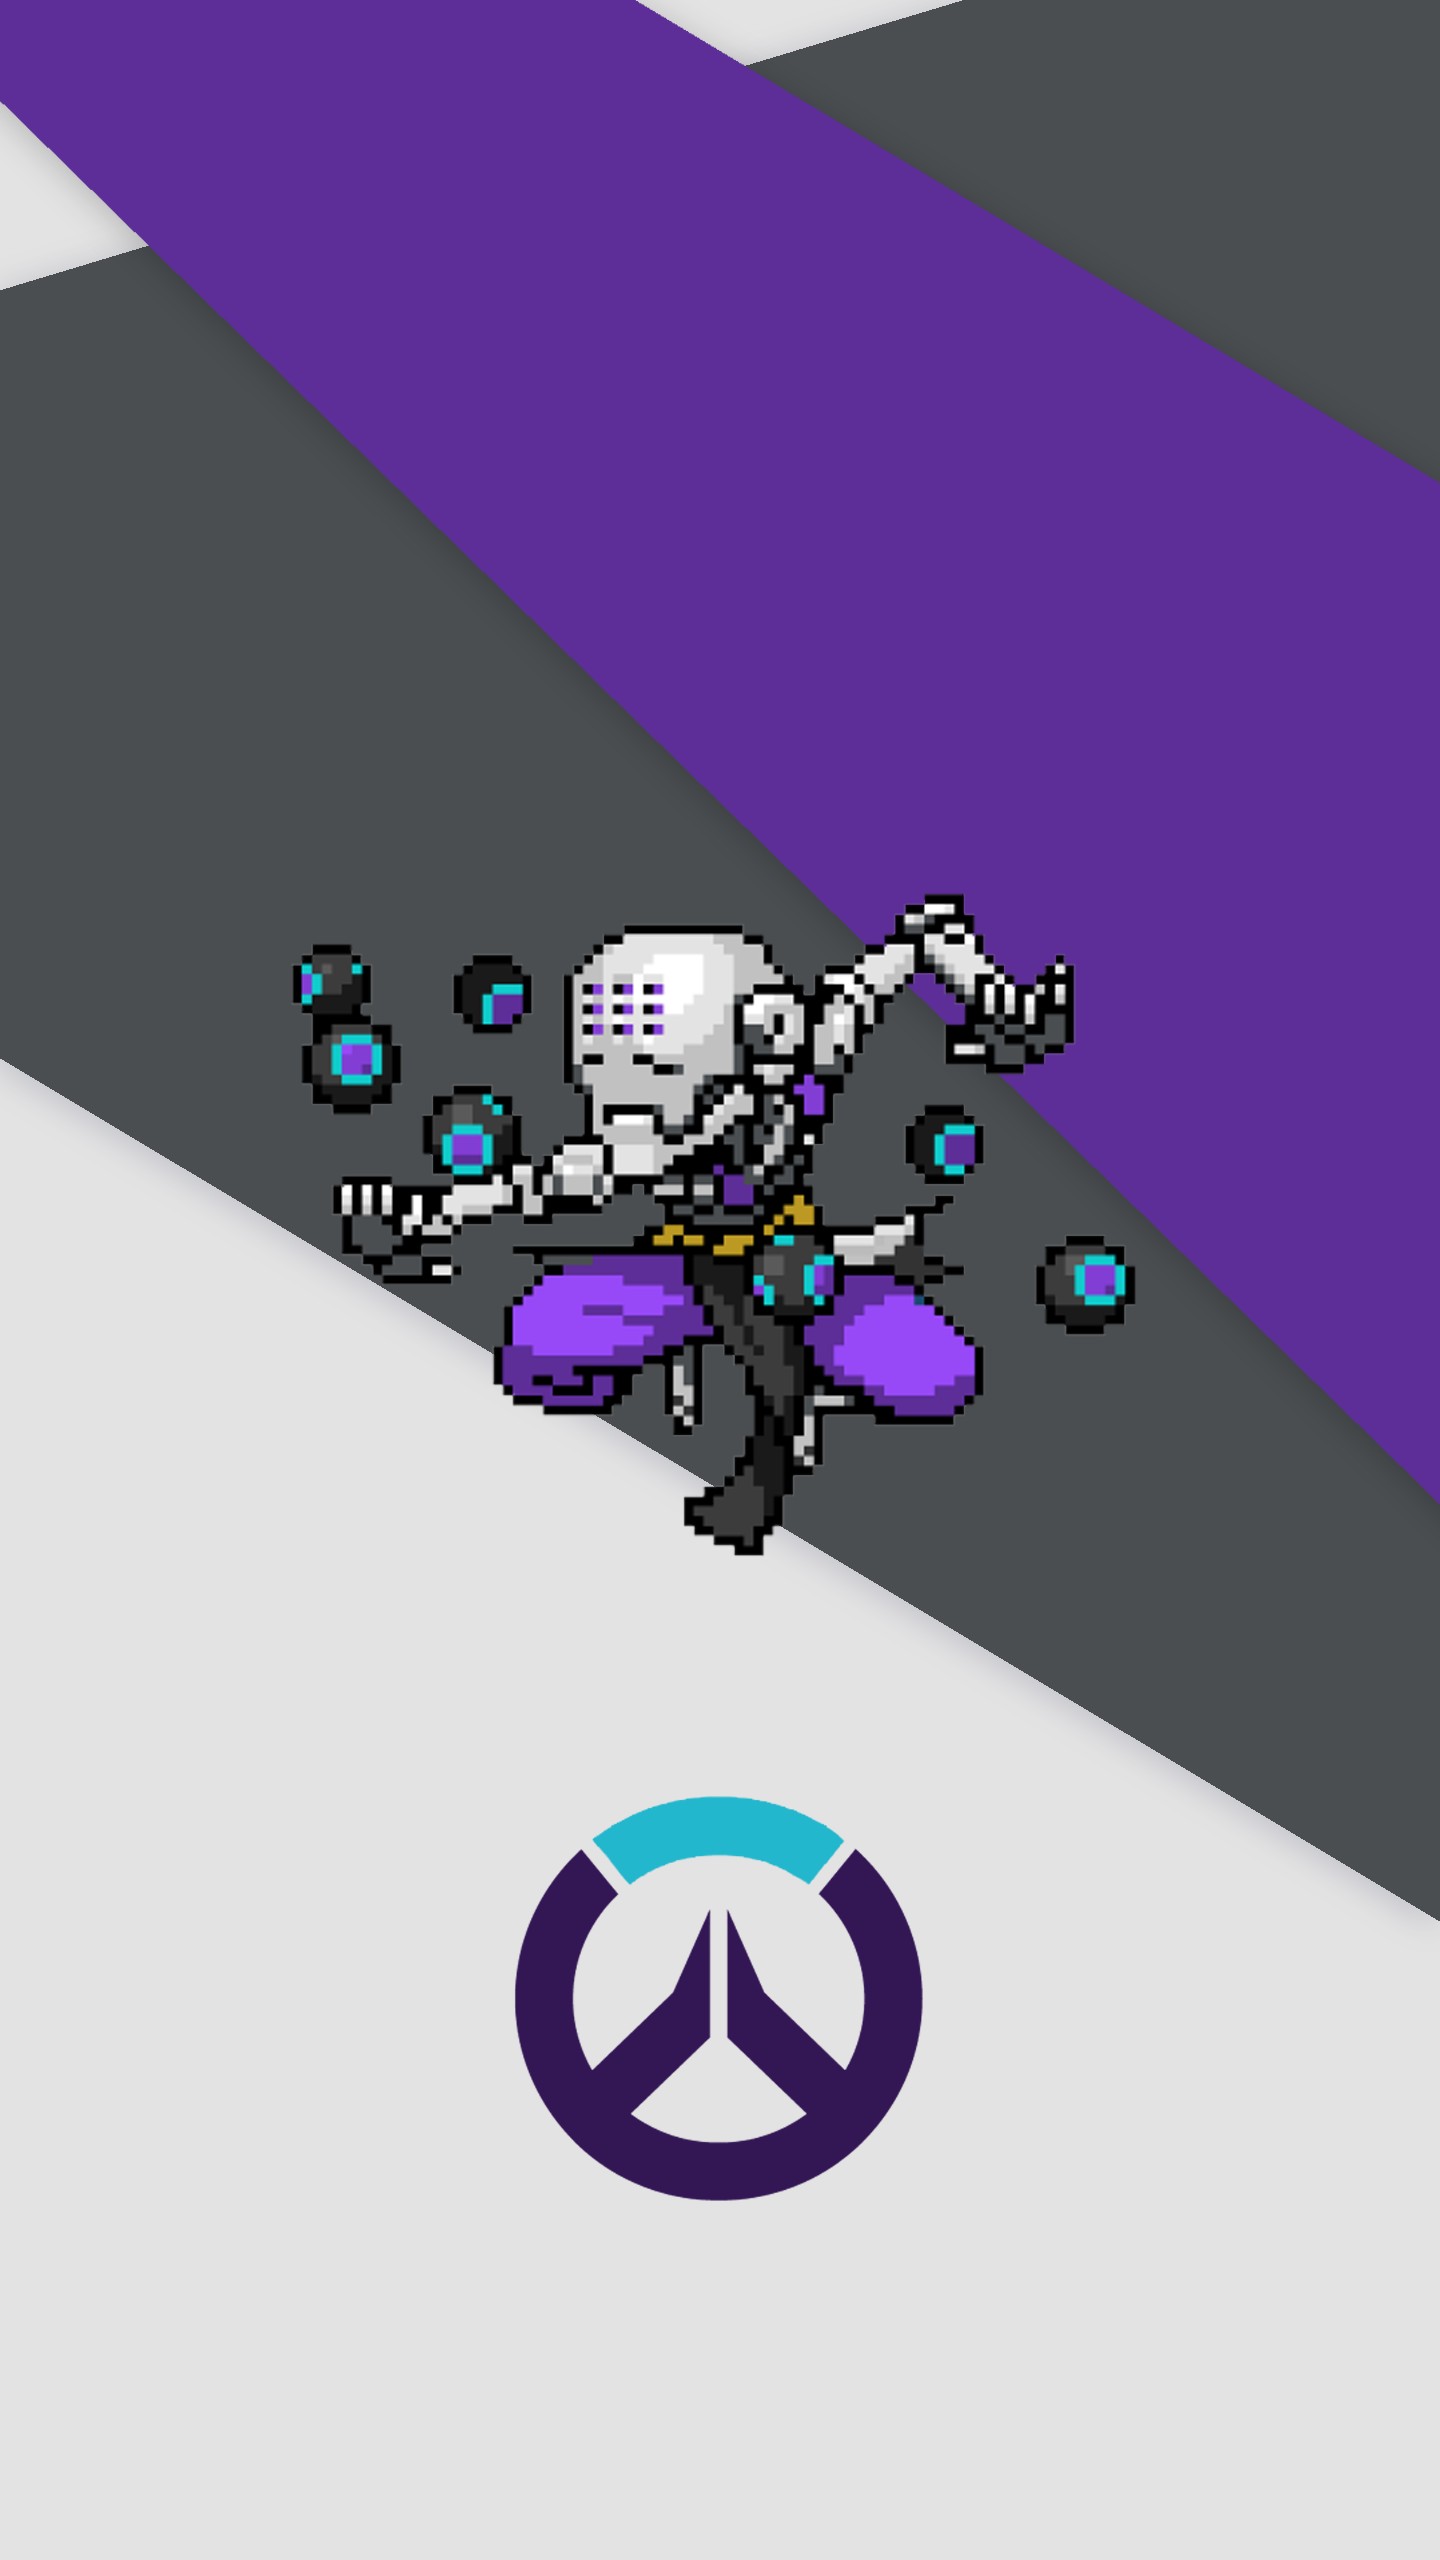 overwatch wallpaper phone,violet,purple,illustration,graphic design,fictional character